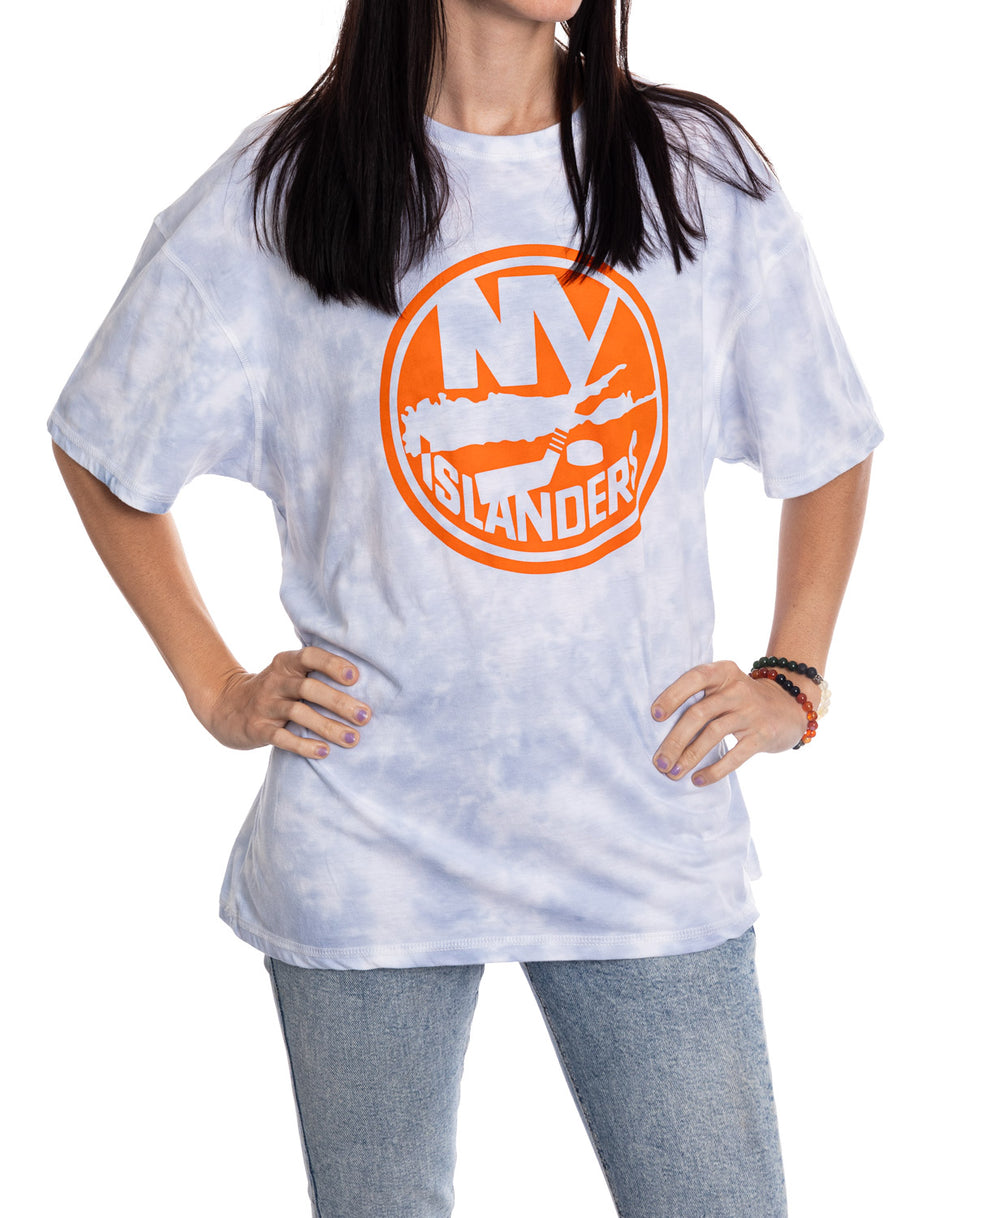 New York Islanders NHL Special Design Jersey With Your Ribs For Halloween  Hoodie T Shirt - Growkoc